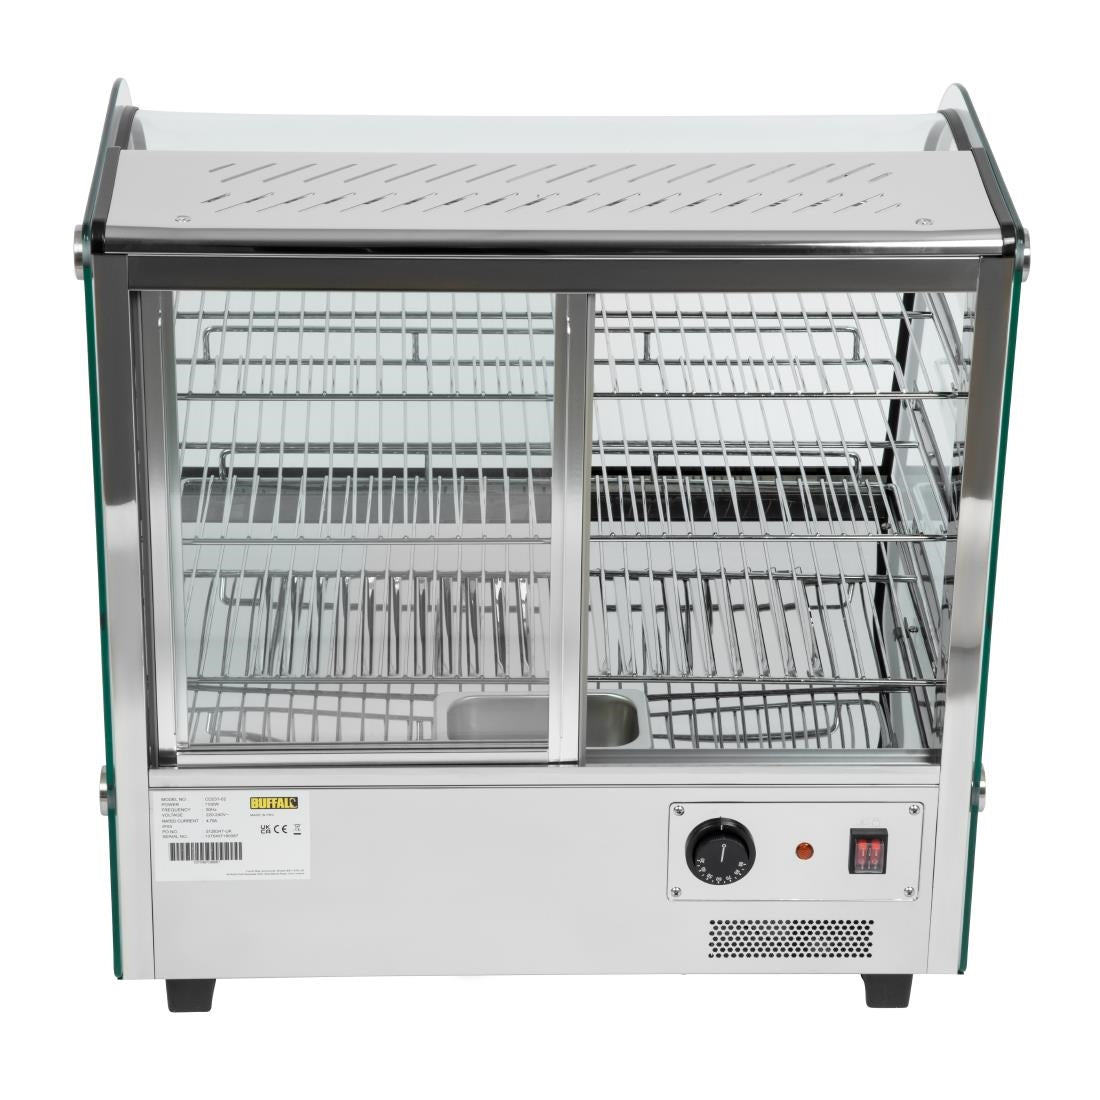 Buffalo Countertop Heated Food Display 687mm JD Catering Equipment Solutions Ltd